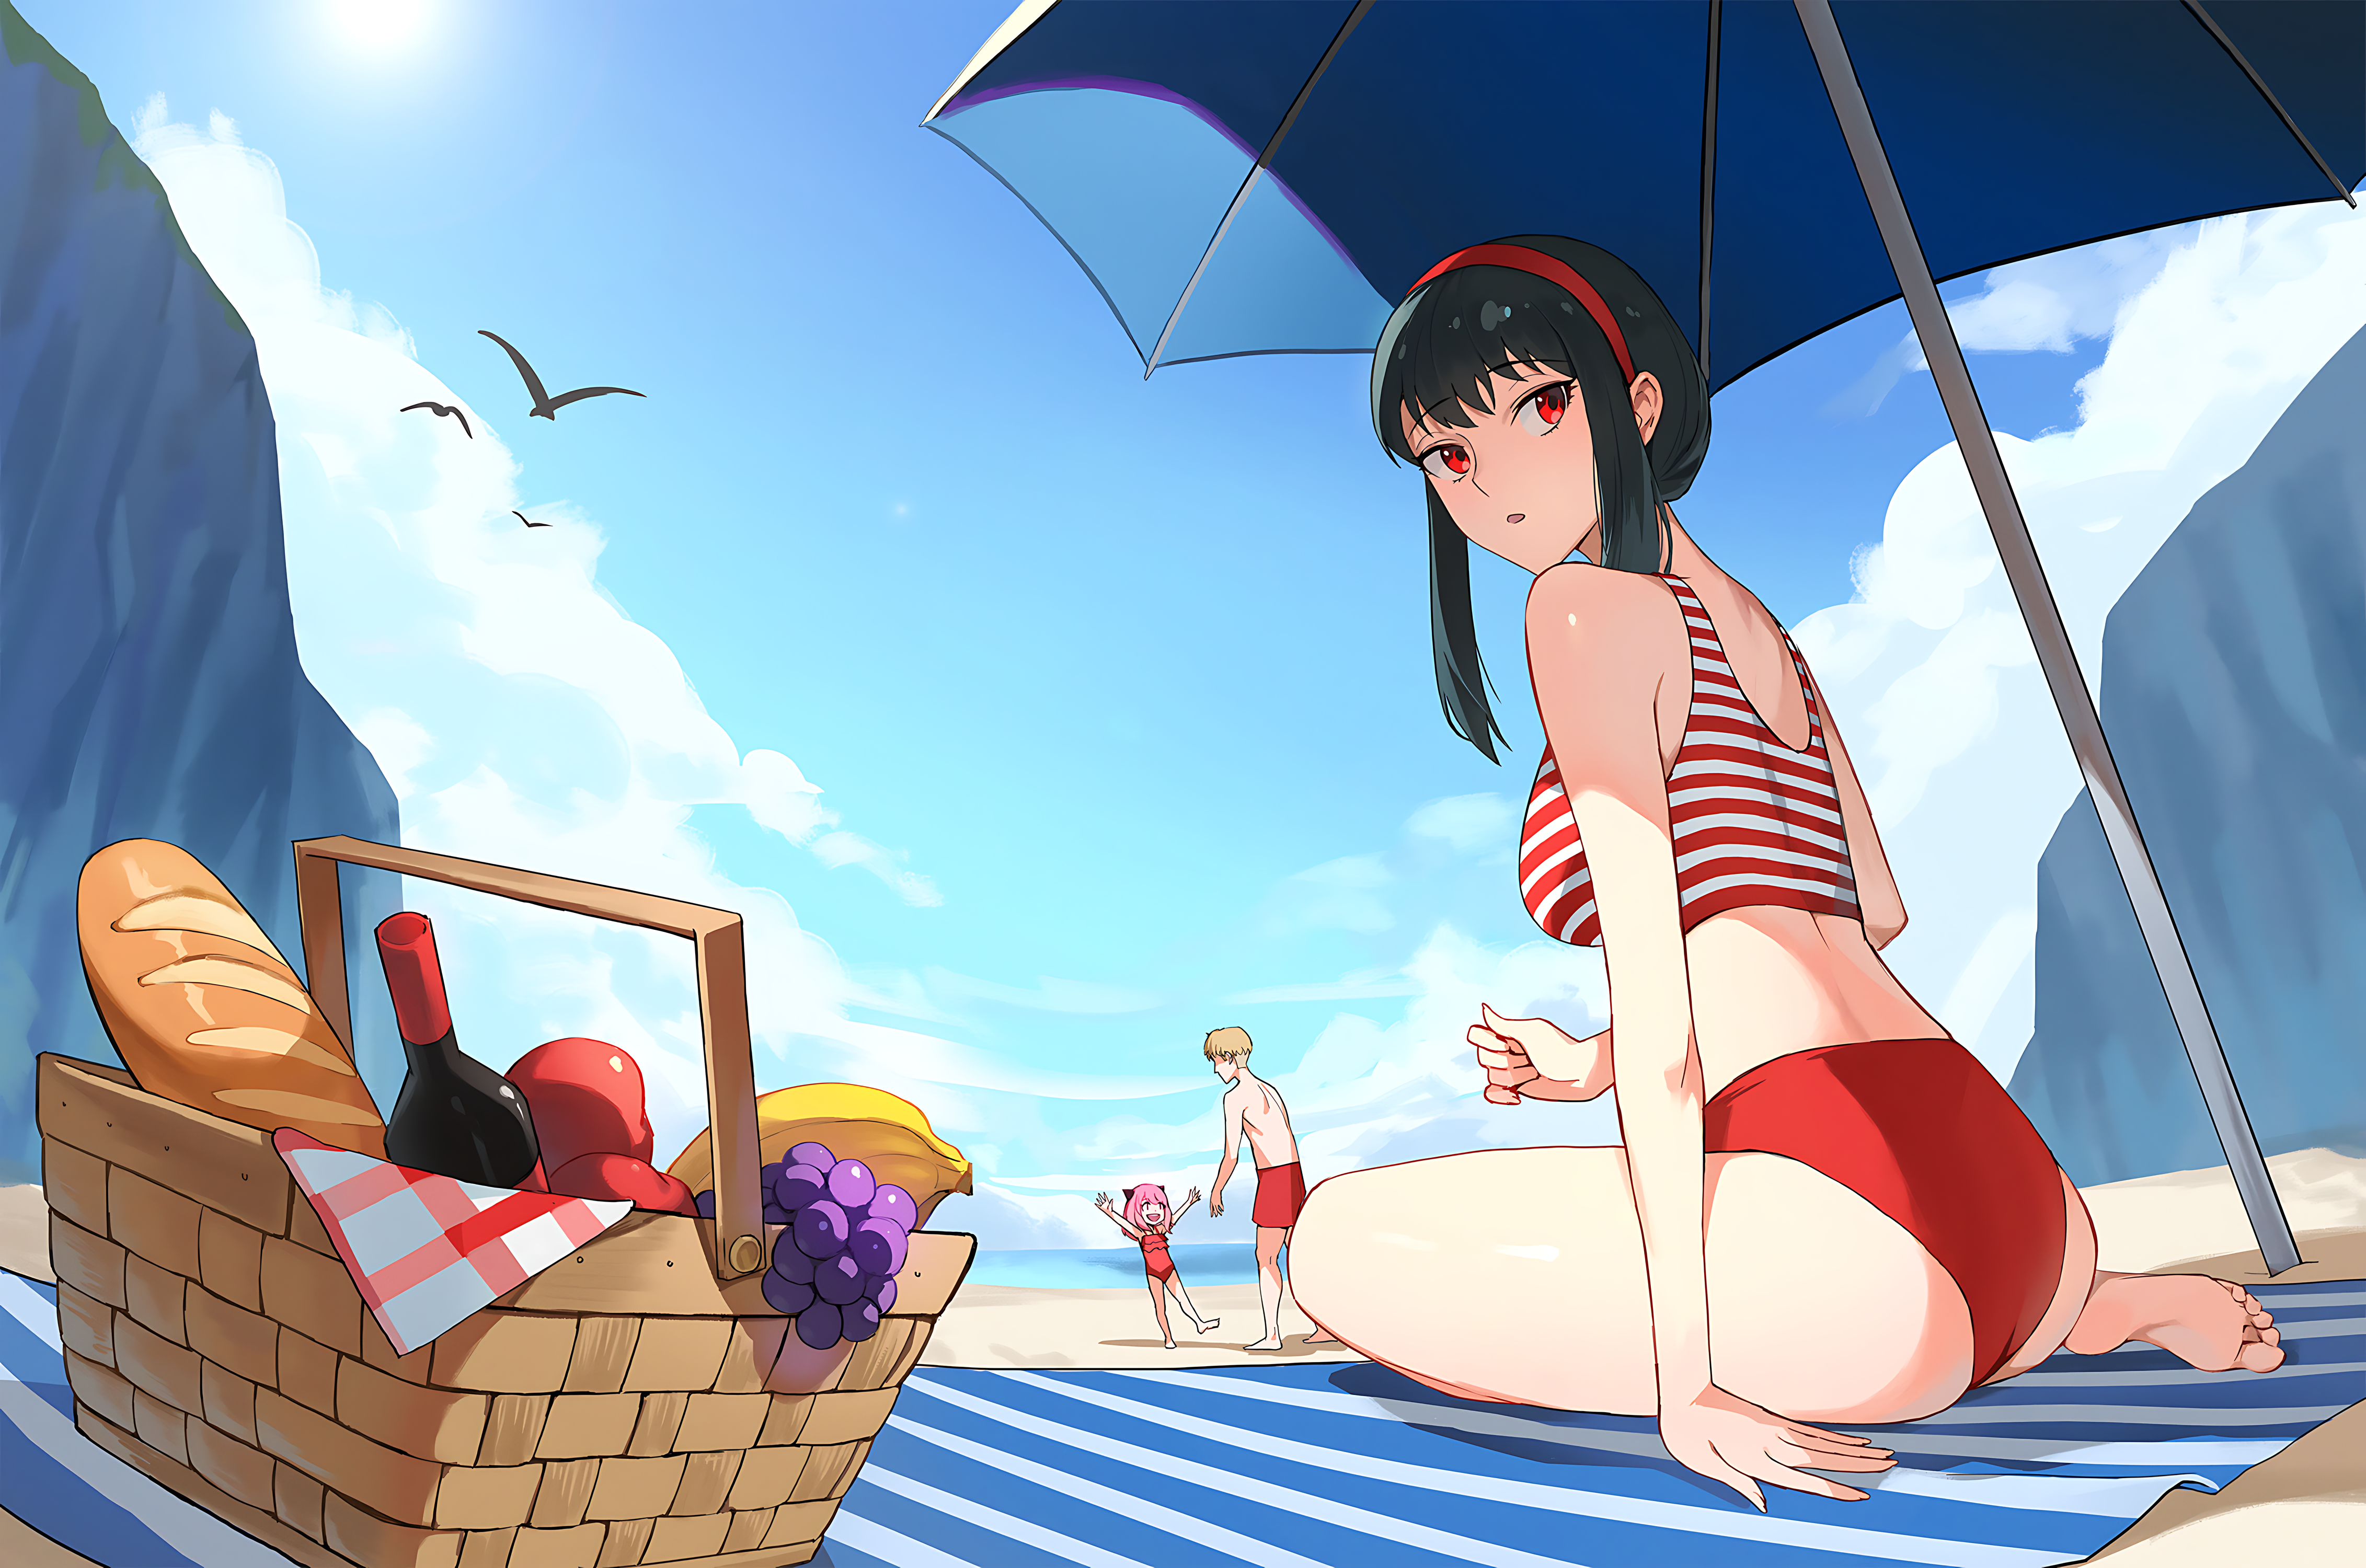 Anime 4526x3000 Yor Forger Anya Forger Loid Forger Spy x Family anime anime girls artwork drawing 2D fan art Jason Kim beach looking back picnic striped beach umbrella food sky clouds beach towel red swimsuit bright bread fruit swimwear open mouth long hair wine bottle